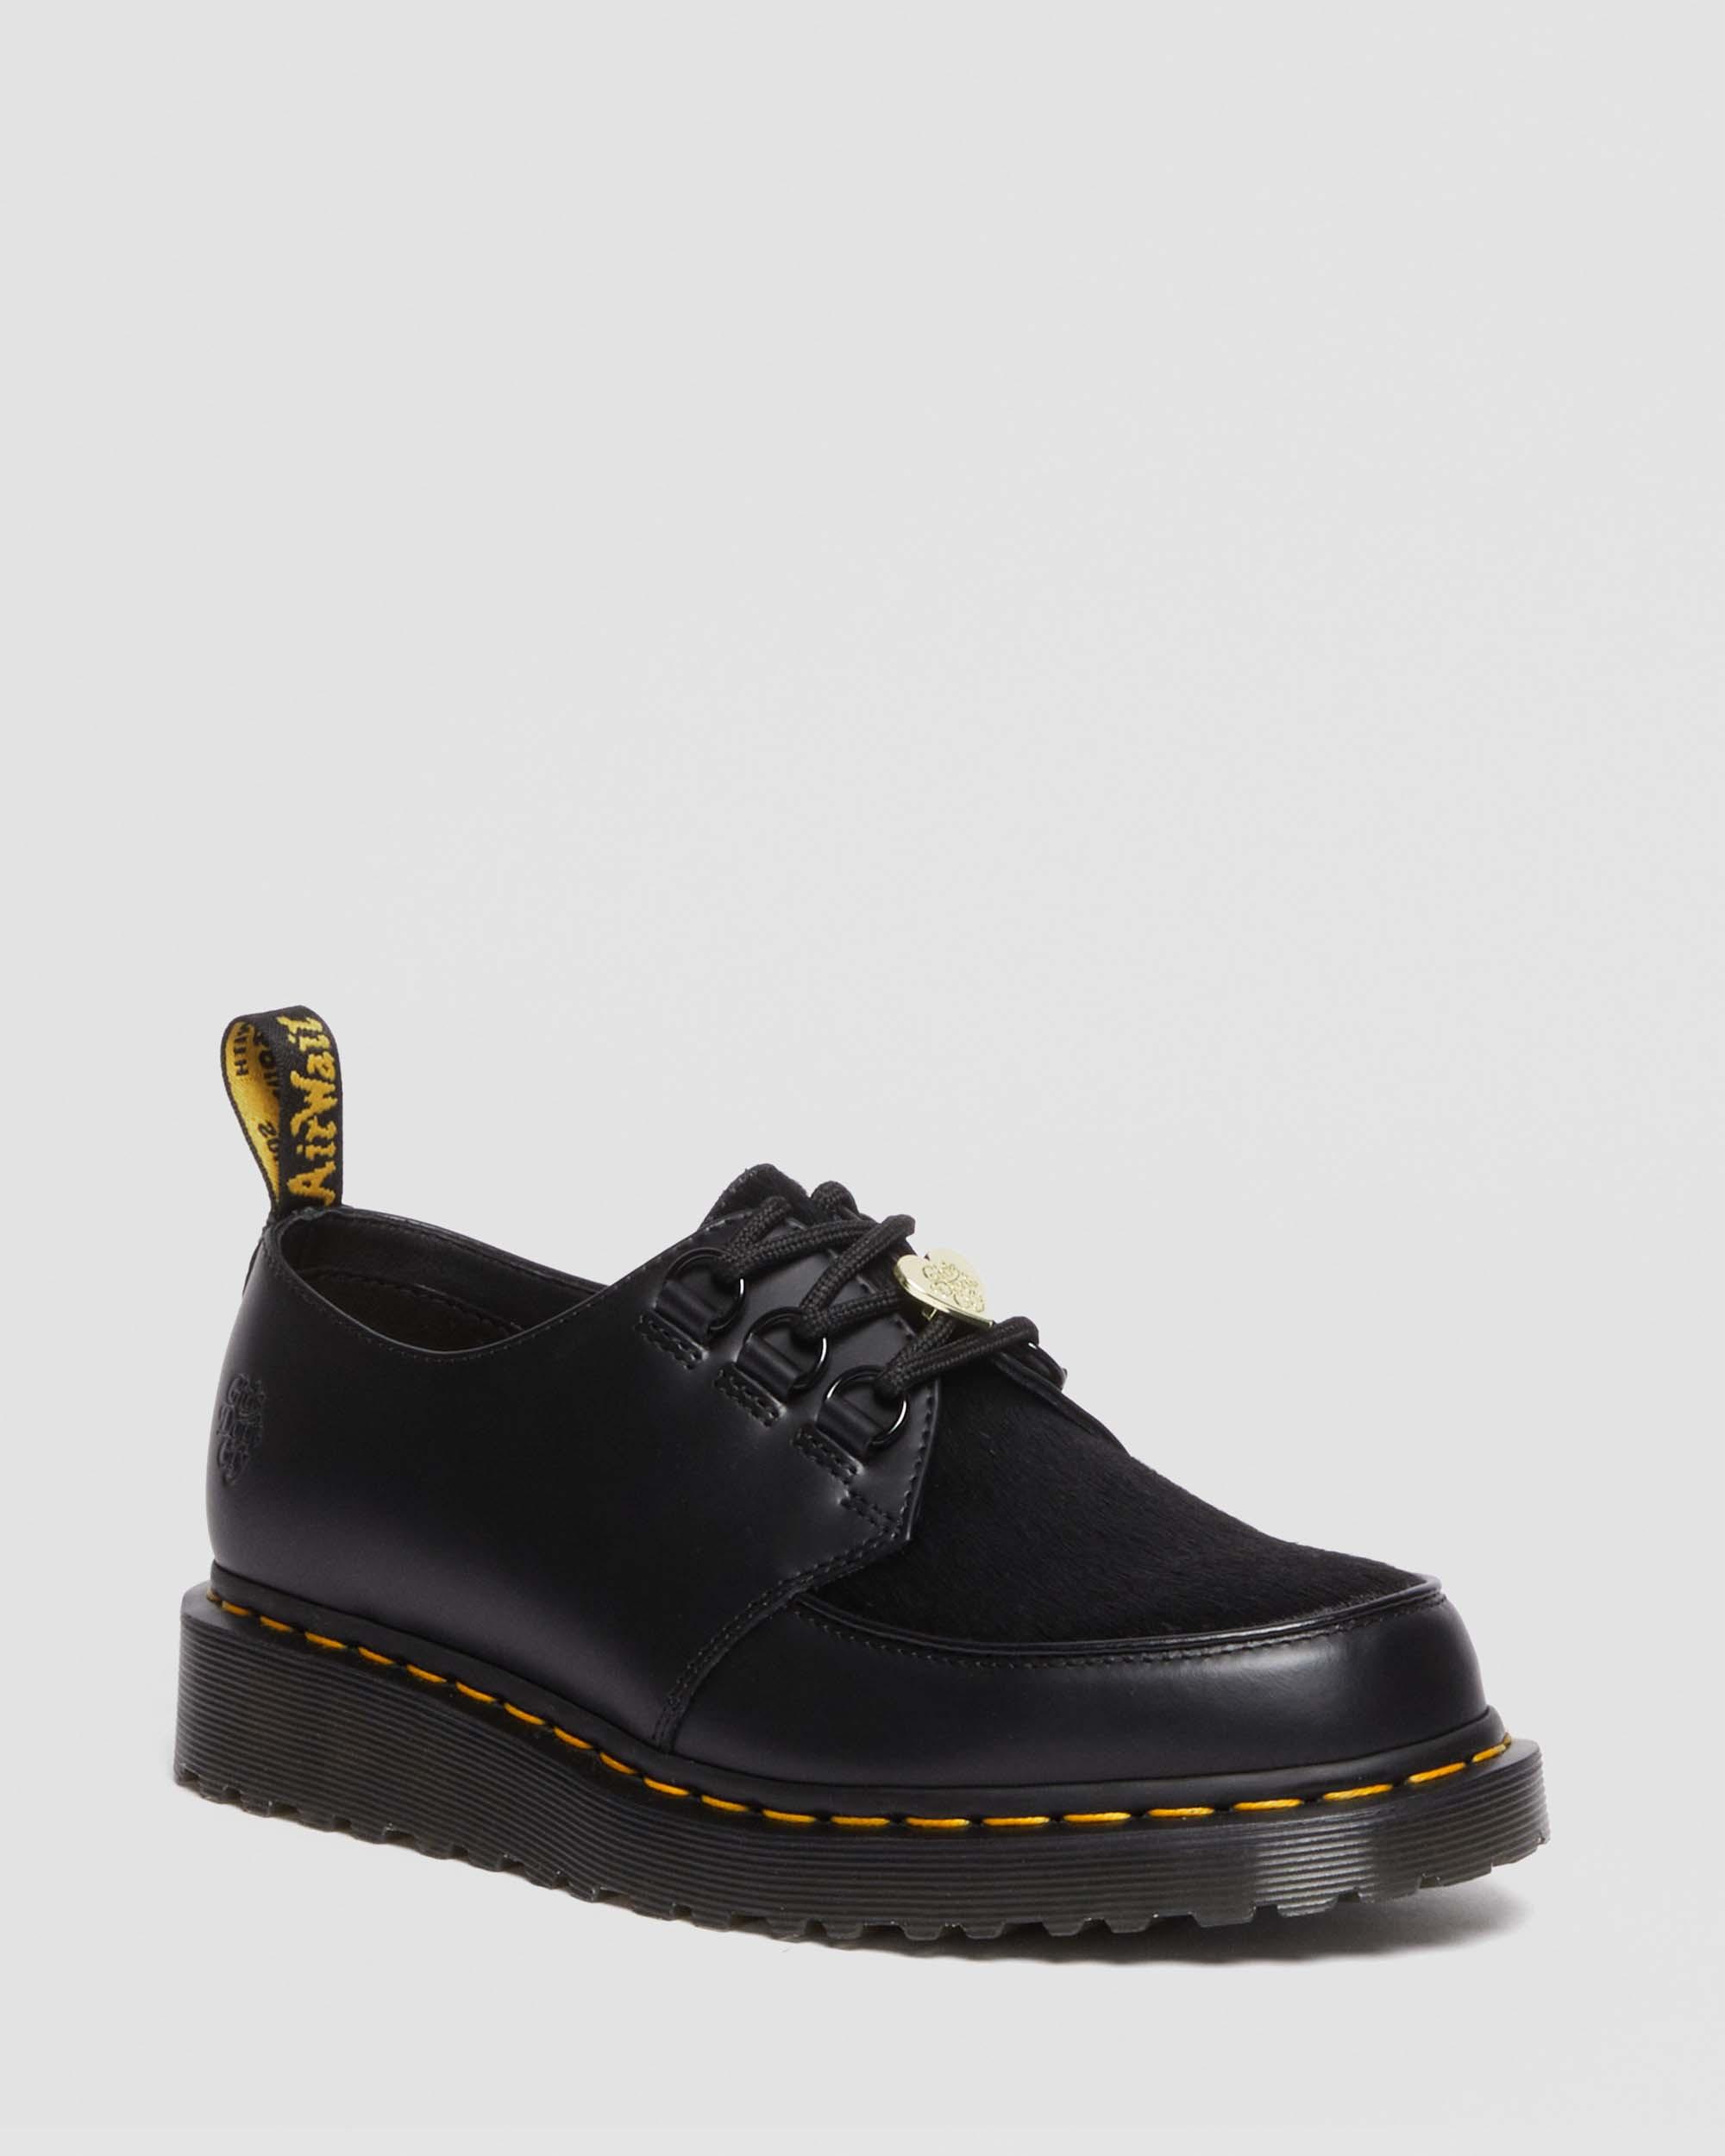 Girls Don't Cry × Dr.Martens Ramsey 28cm靴 - 靴